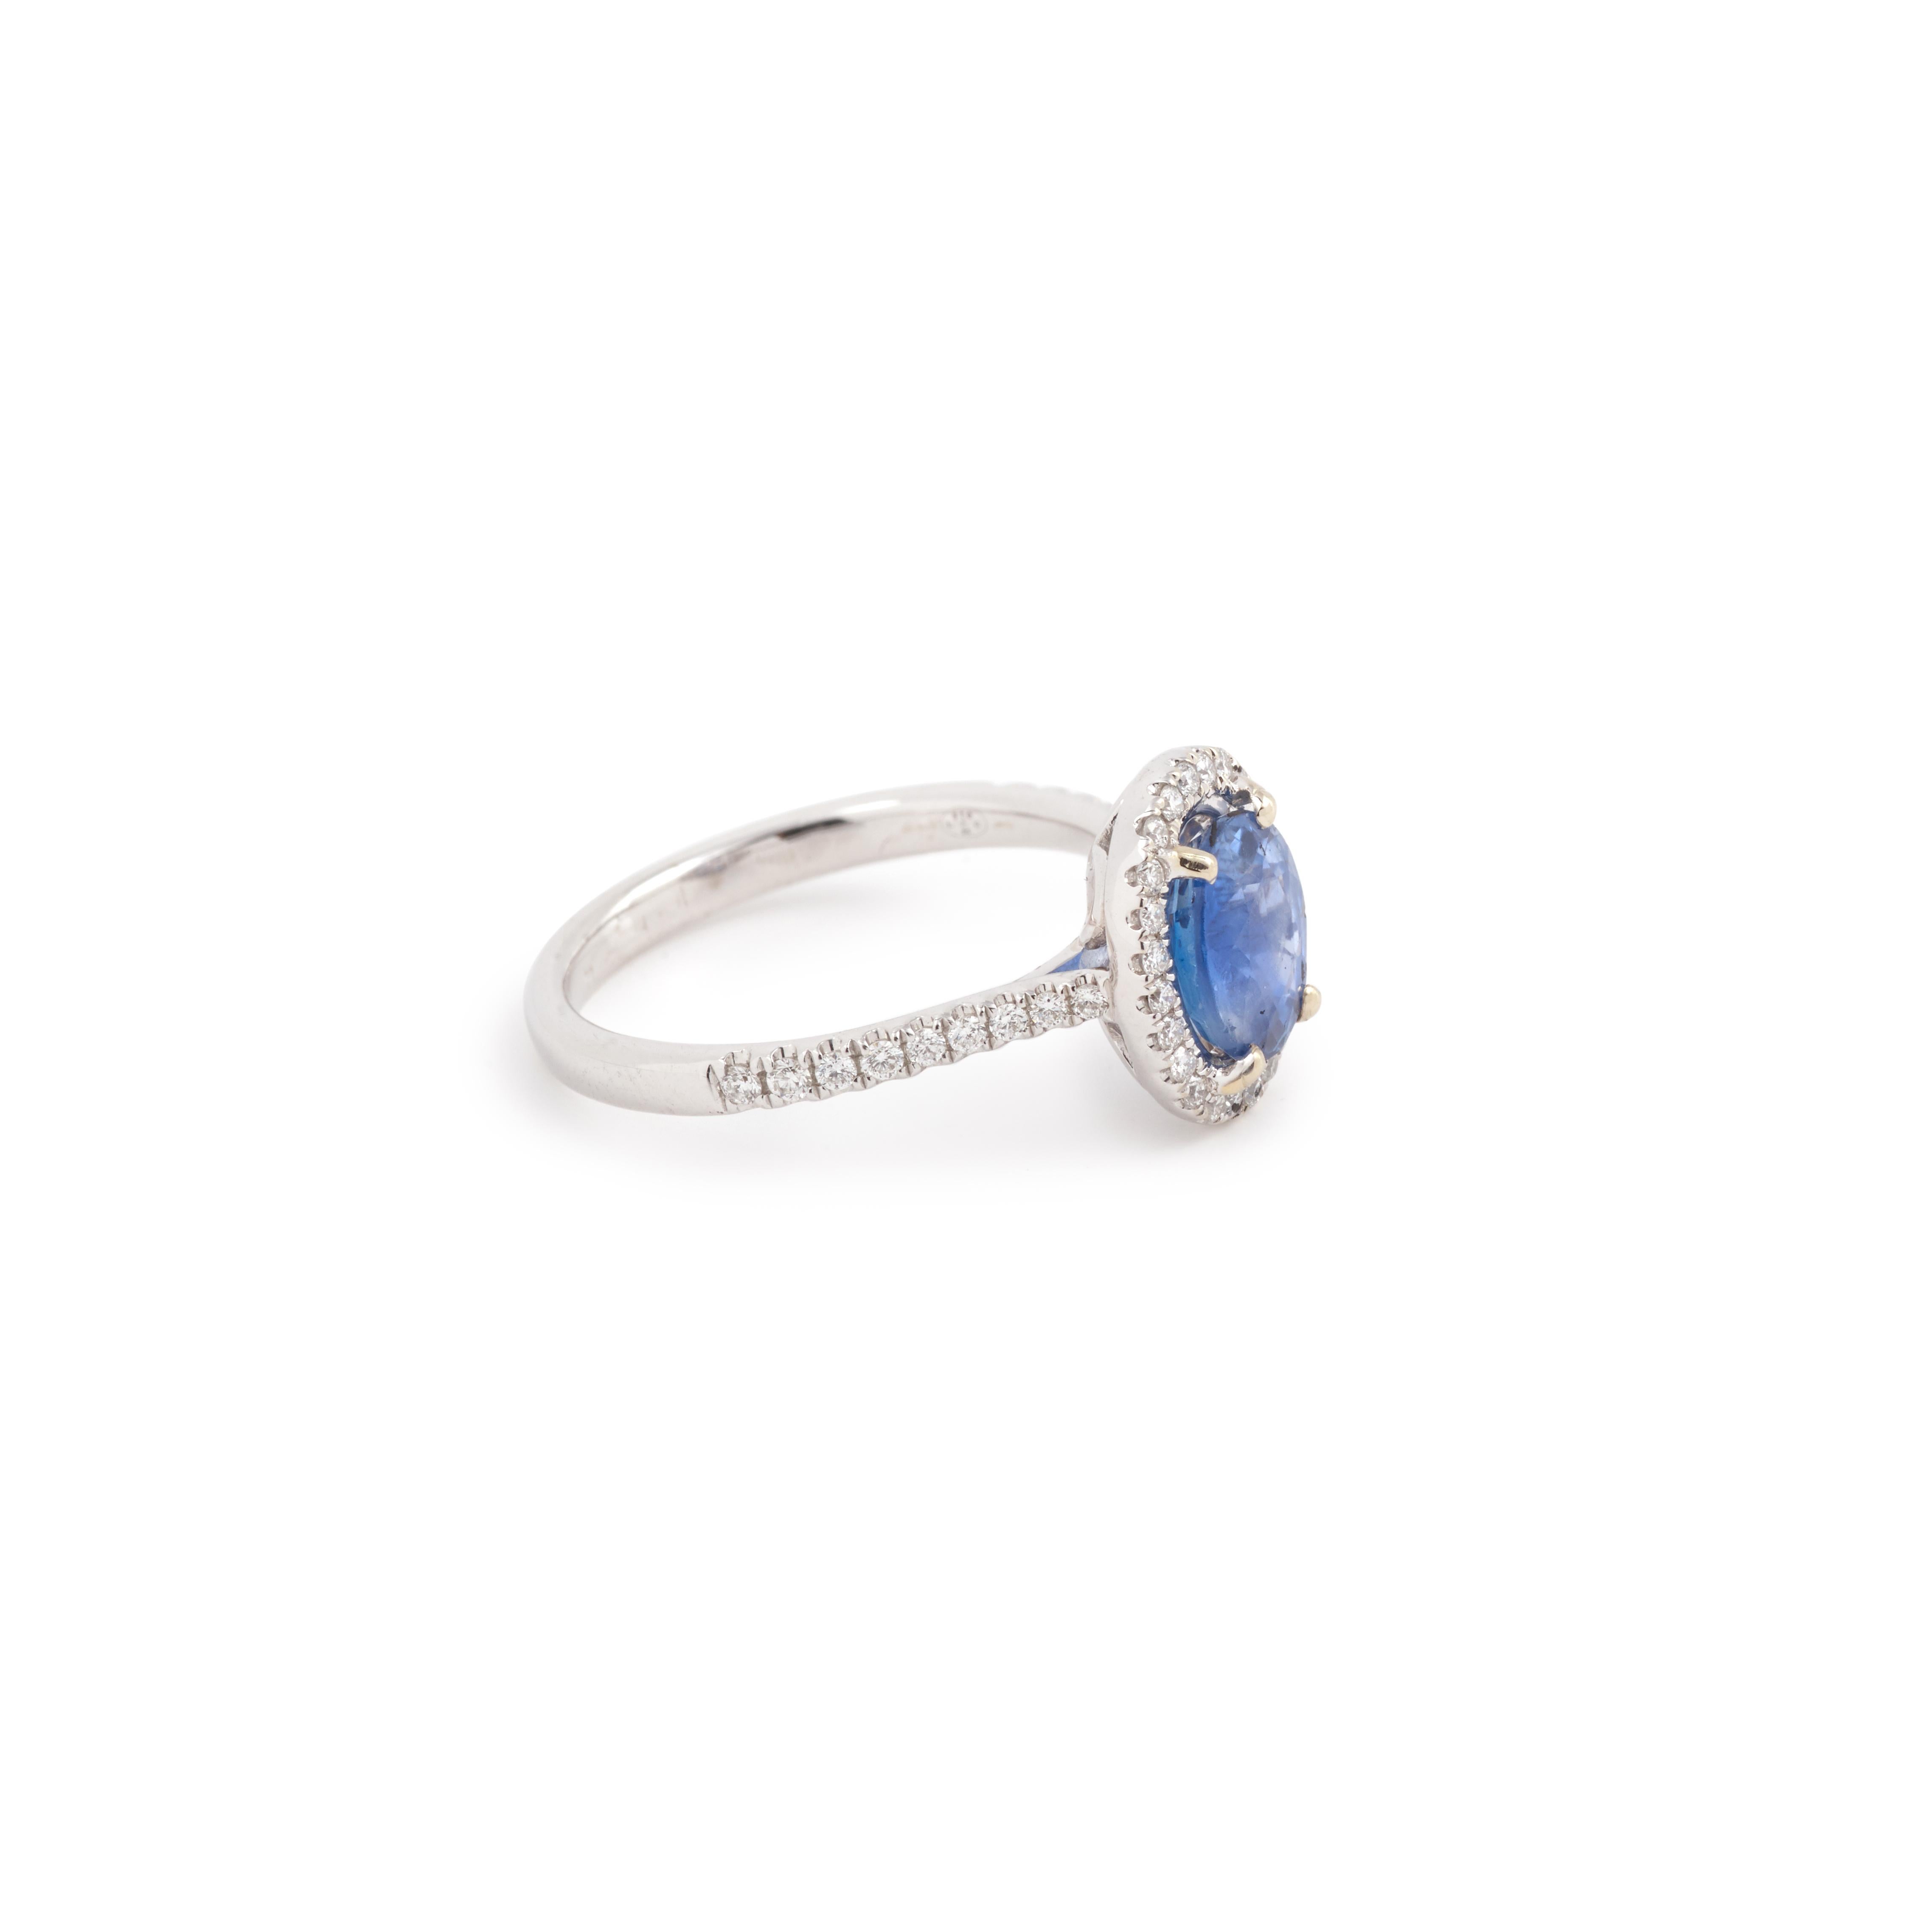 Daisy shape oval Ceylon sapphire diamonds ring, certified by GEM Paris.

Weight: 1.93 carats

Dimensions: 7.69 x 6.98 x 4.35 mm (0.59 x 0.35 x 0.24 inches)

Unheated and untreated (certified).

Set on an 18 carats white gold ring with